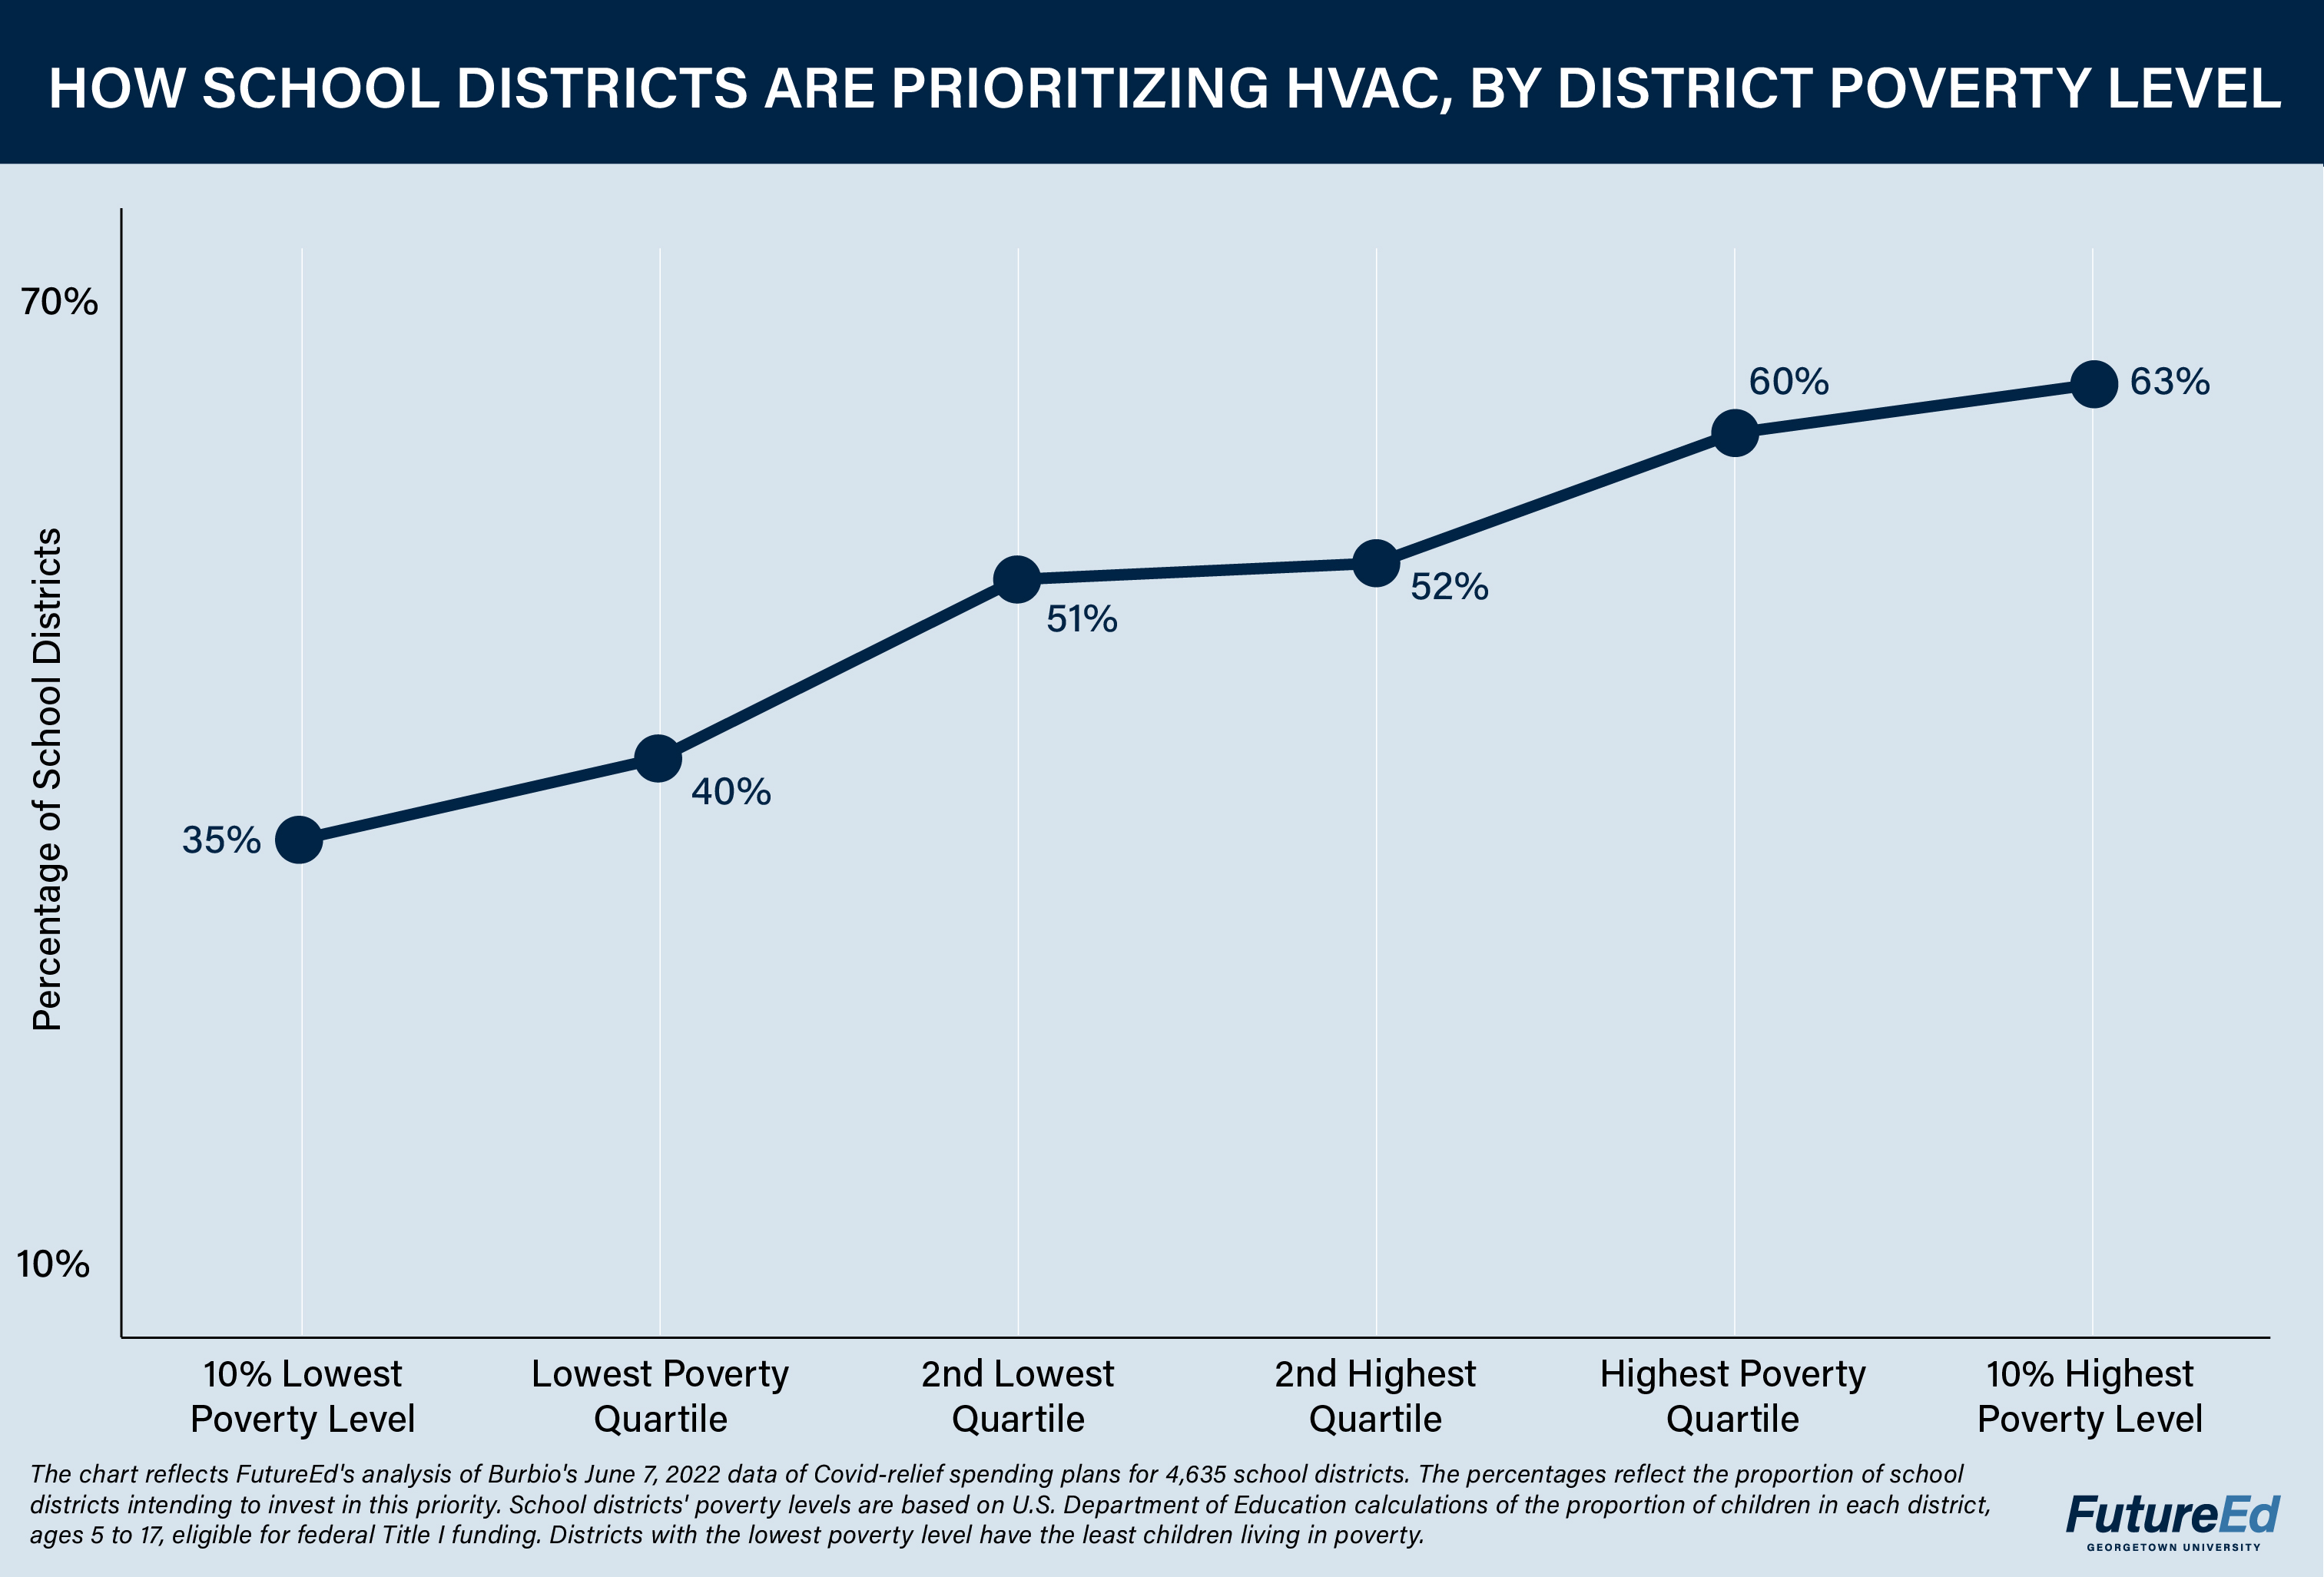 Chart: How School Districts are Prioritizing HVAC, by District Poverty Level. Percentage of School Districts. 10% lowest poverty level: 35%. Lowest poverty quartile: 40%. 2nd lowest quartile: 51%. 2nd highest quartile: 52%. Highest poverty quartile: 60%. 10% highest poverty level: 63%. (The chart reflects FutureEd's analysis of Burbio's June 7, 2022 data of Covid-relief spending plans for 4,635 school districts. The percentages reflect the proportion of school districts intending to invest in this priority. School districts' poverty levels are based on U.S. Department of Education calculations of the proportion of children in each district, ages 5 to 17, eligible for federal Title I funding. Districts with the lowest poverty level have the least children living in poverty.)